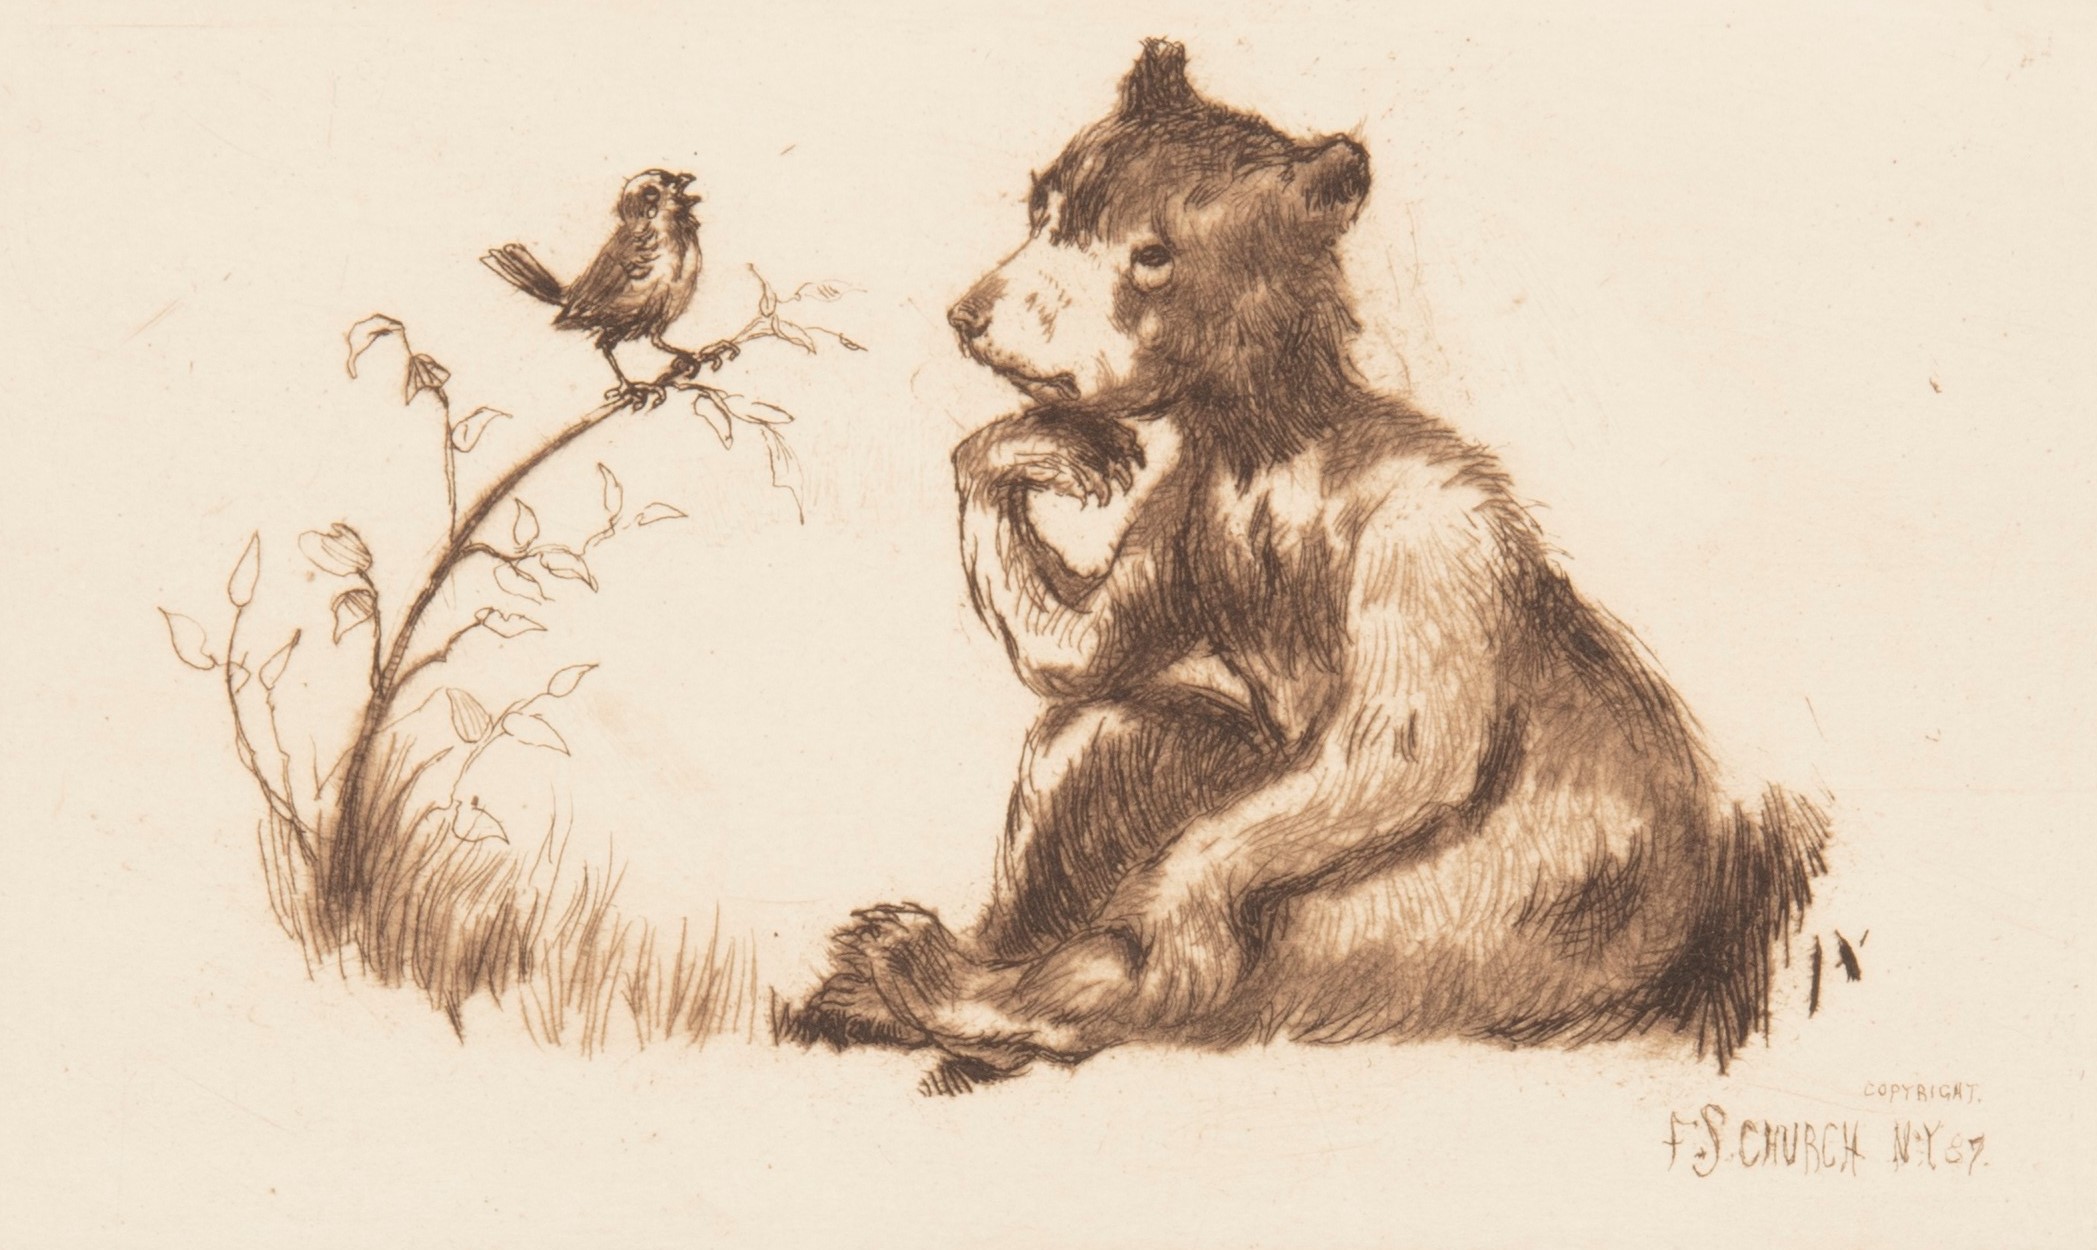 Right, pensive black bear with right elbow on knee and hand under chin. Left, bird singing, perched on twig or blade of grass